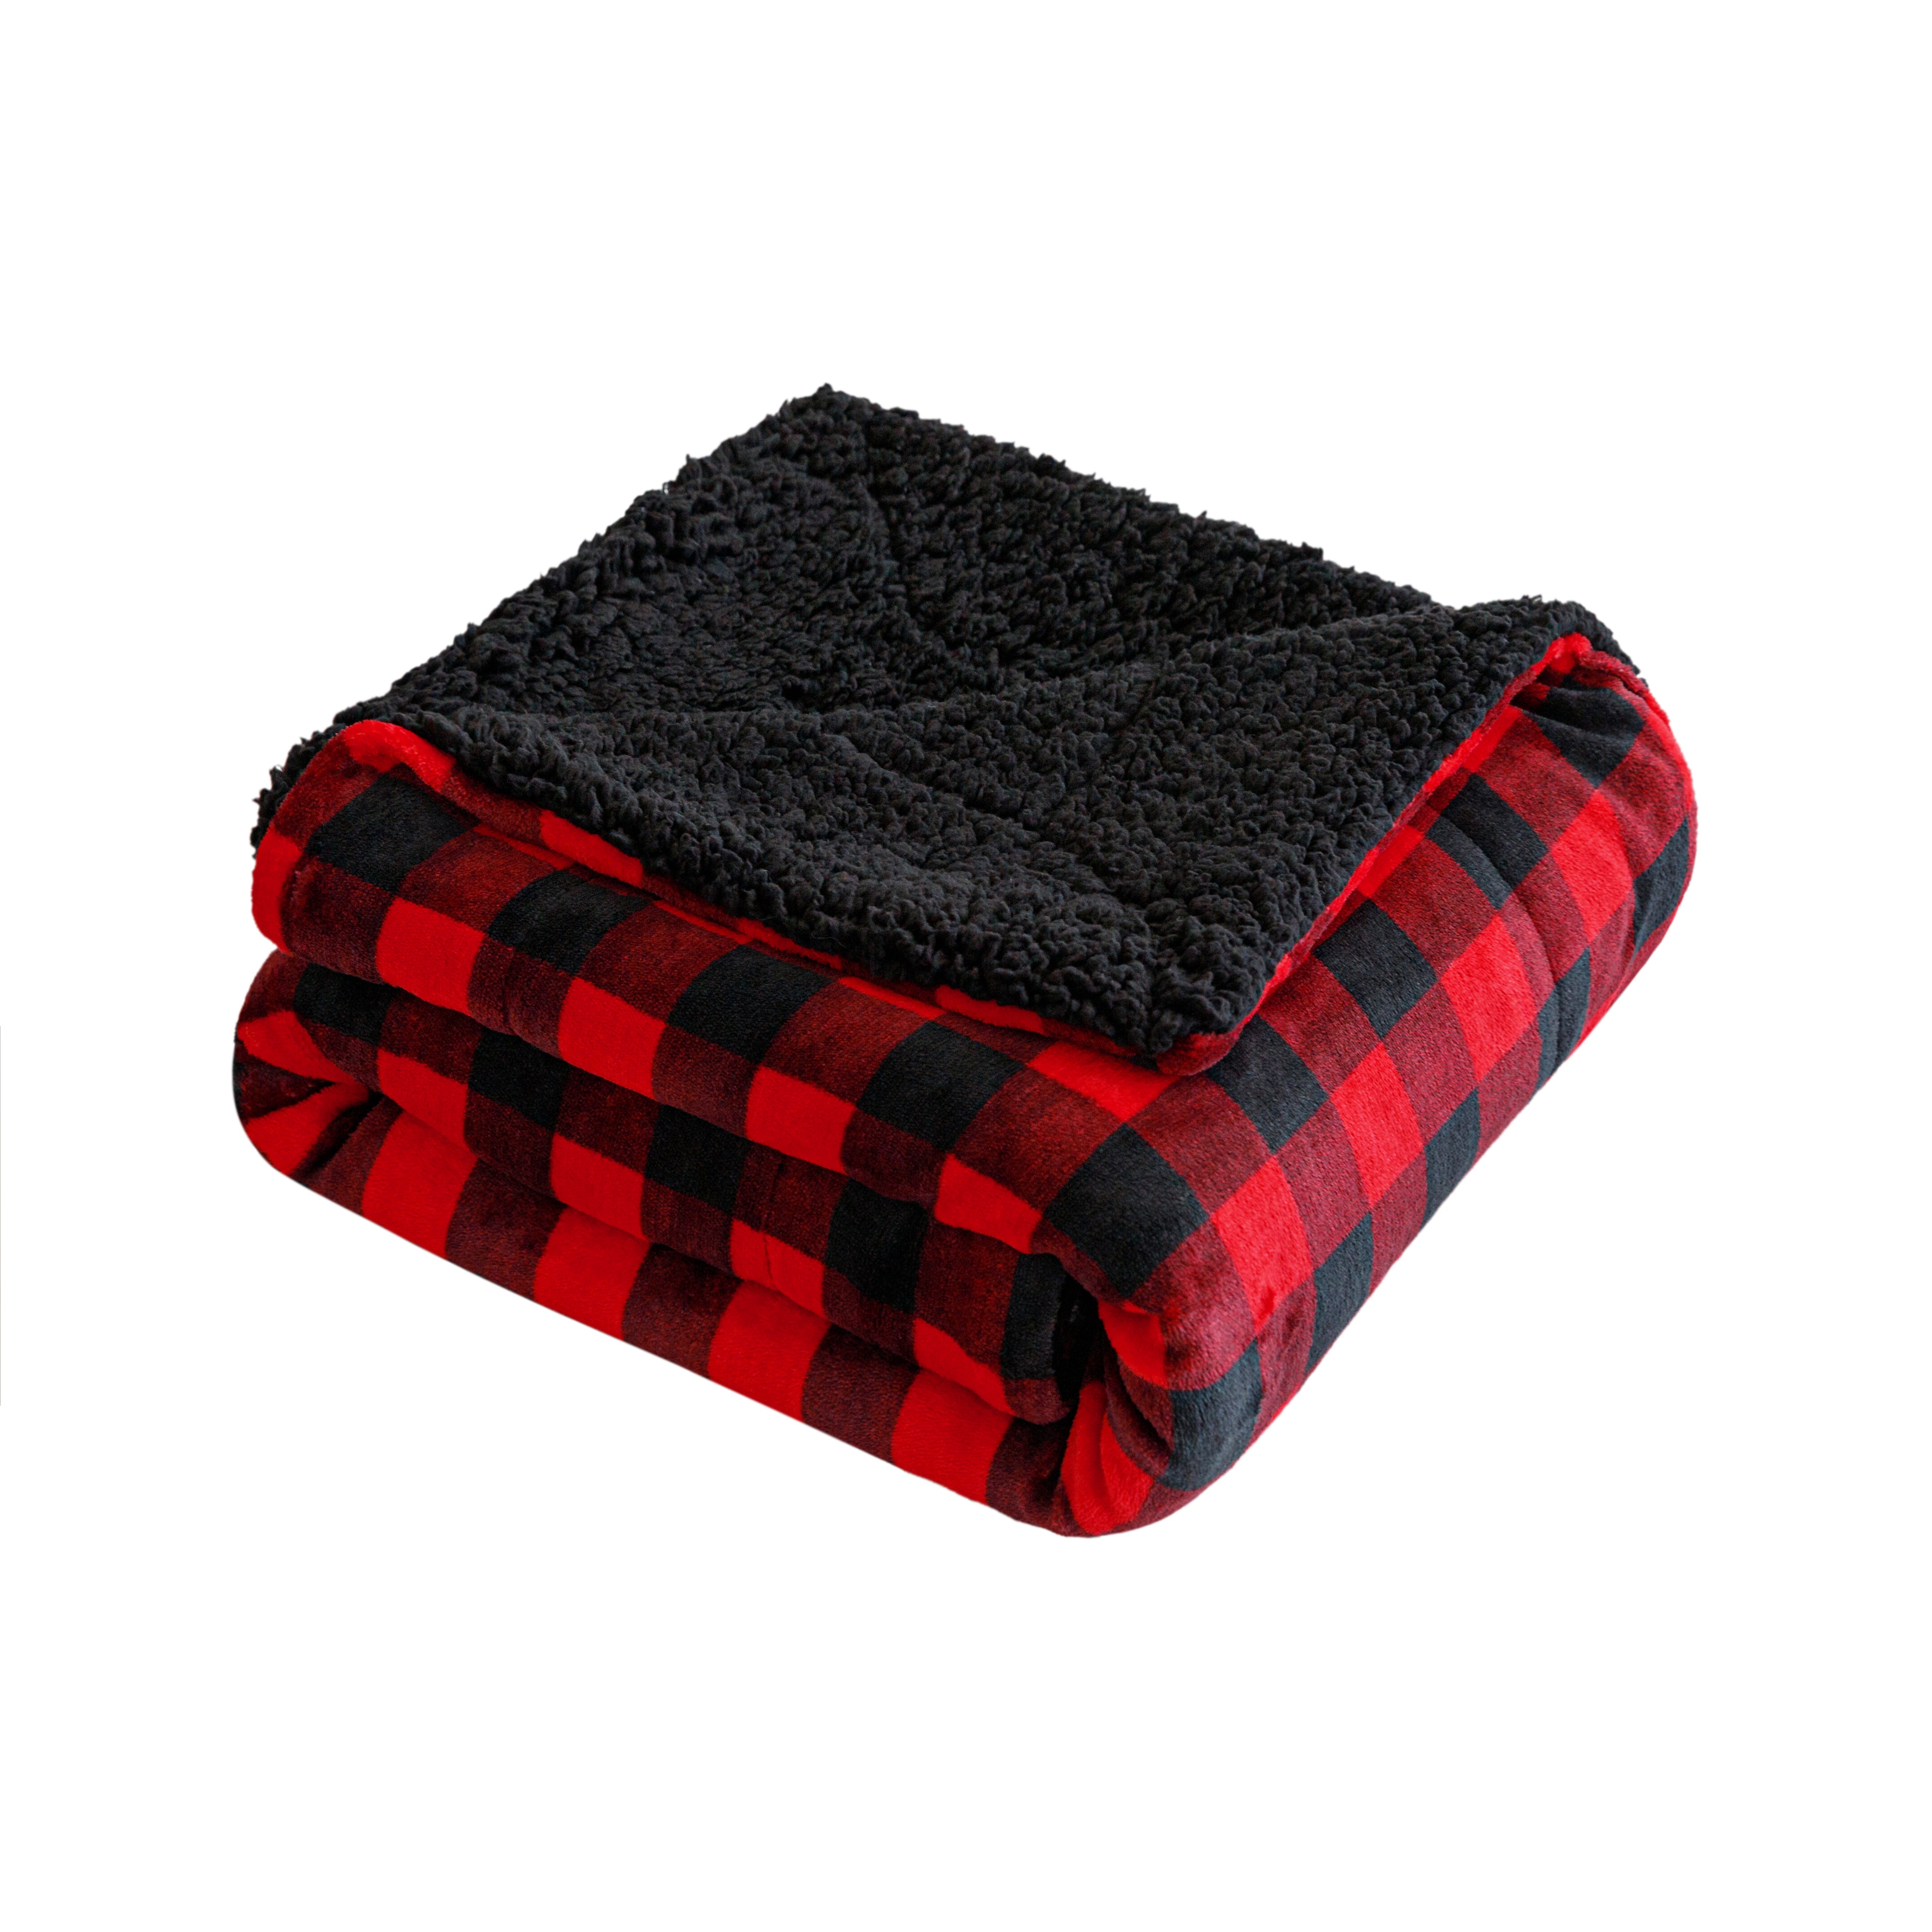 Velvet to Sherpa Throw Blanket 50 x 60 inches Red Buffalo Check to Black